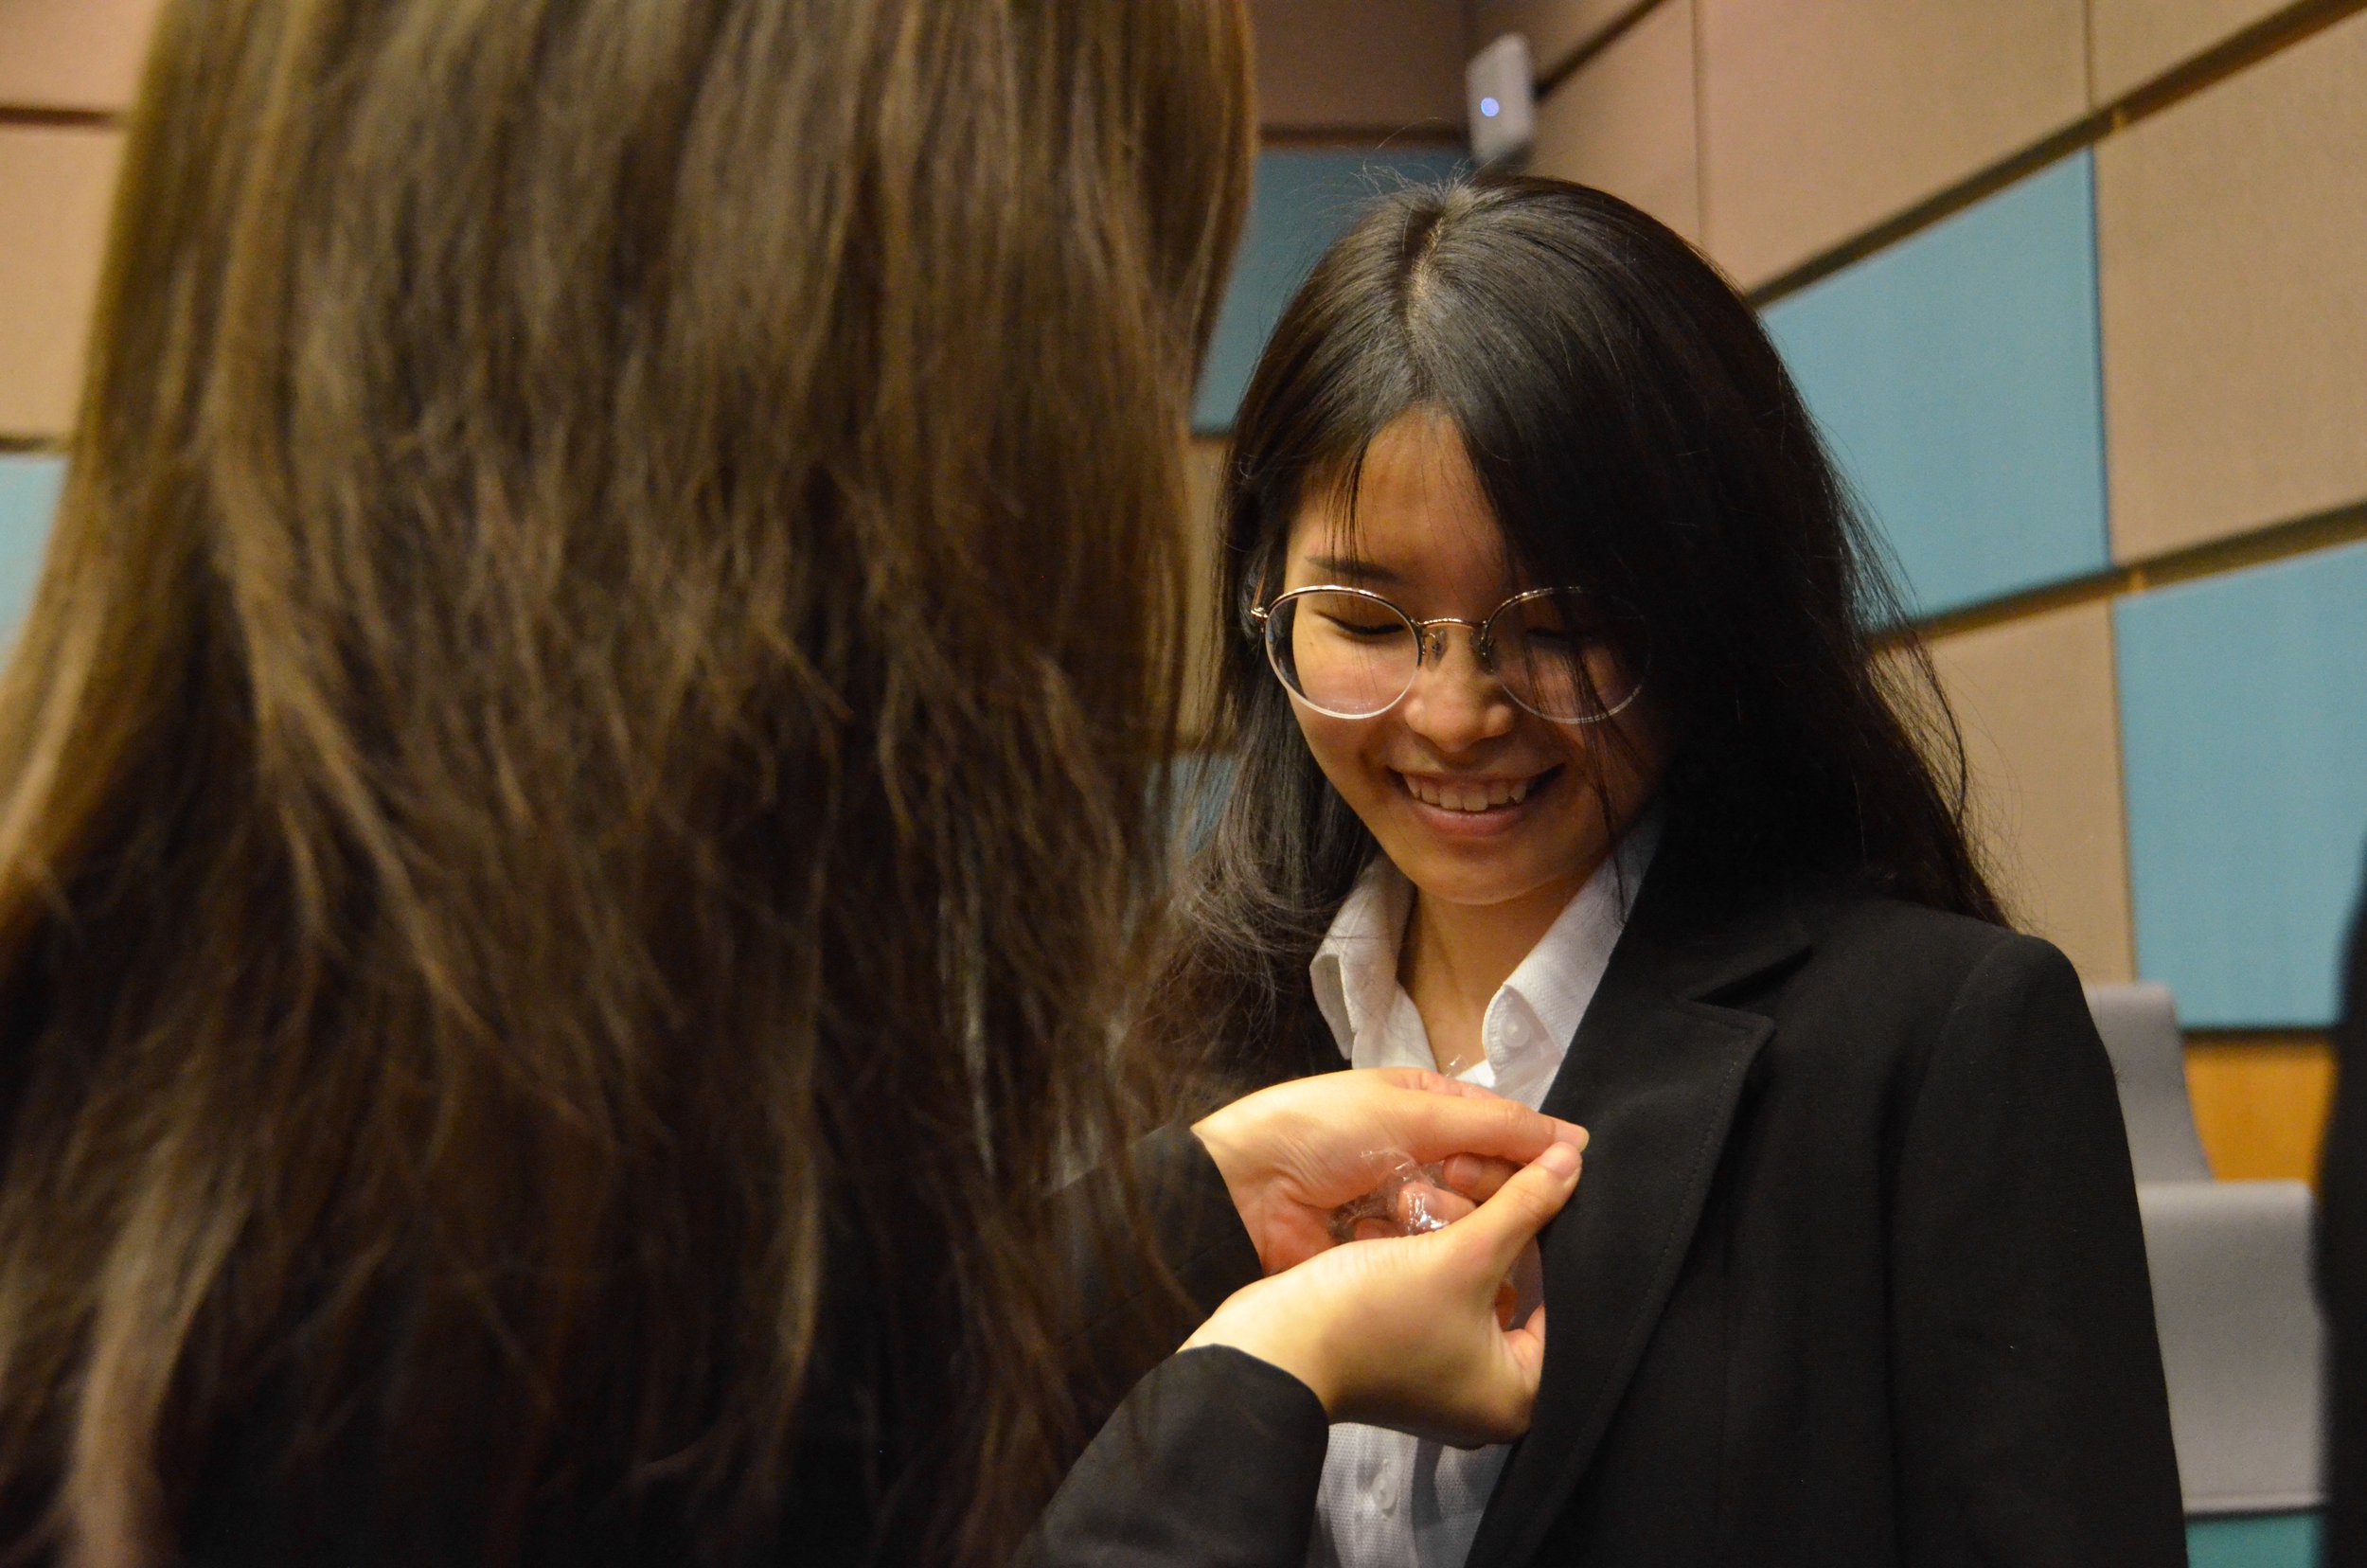 An OGL pinning the NUS Law badge on her freshman